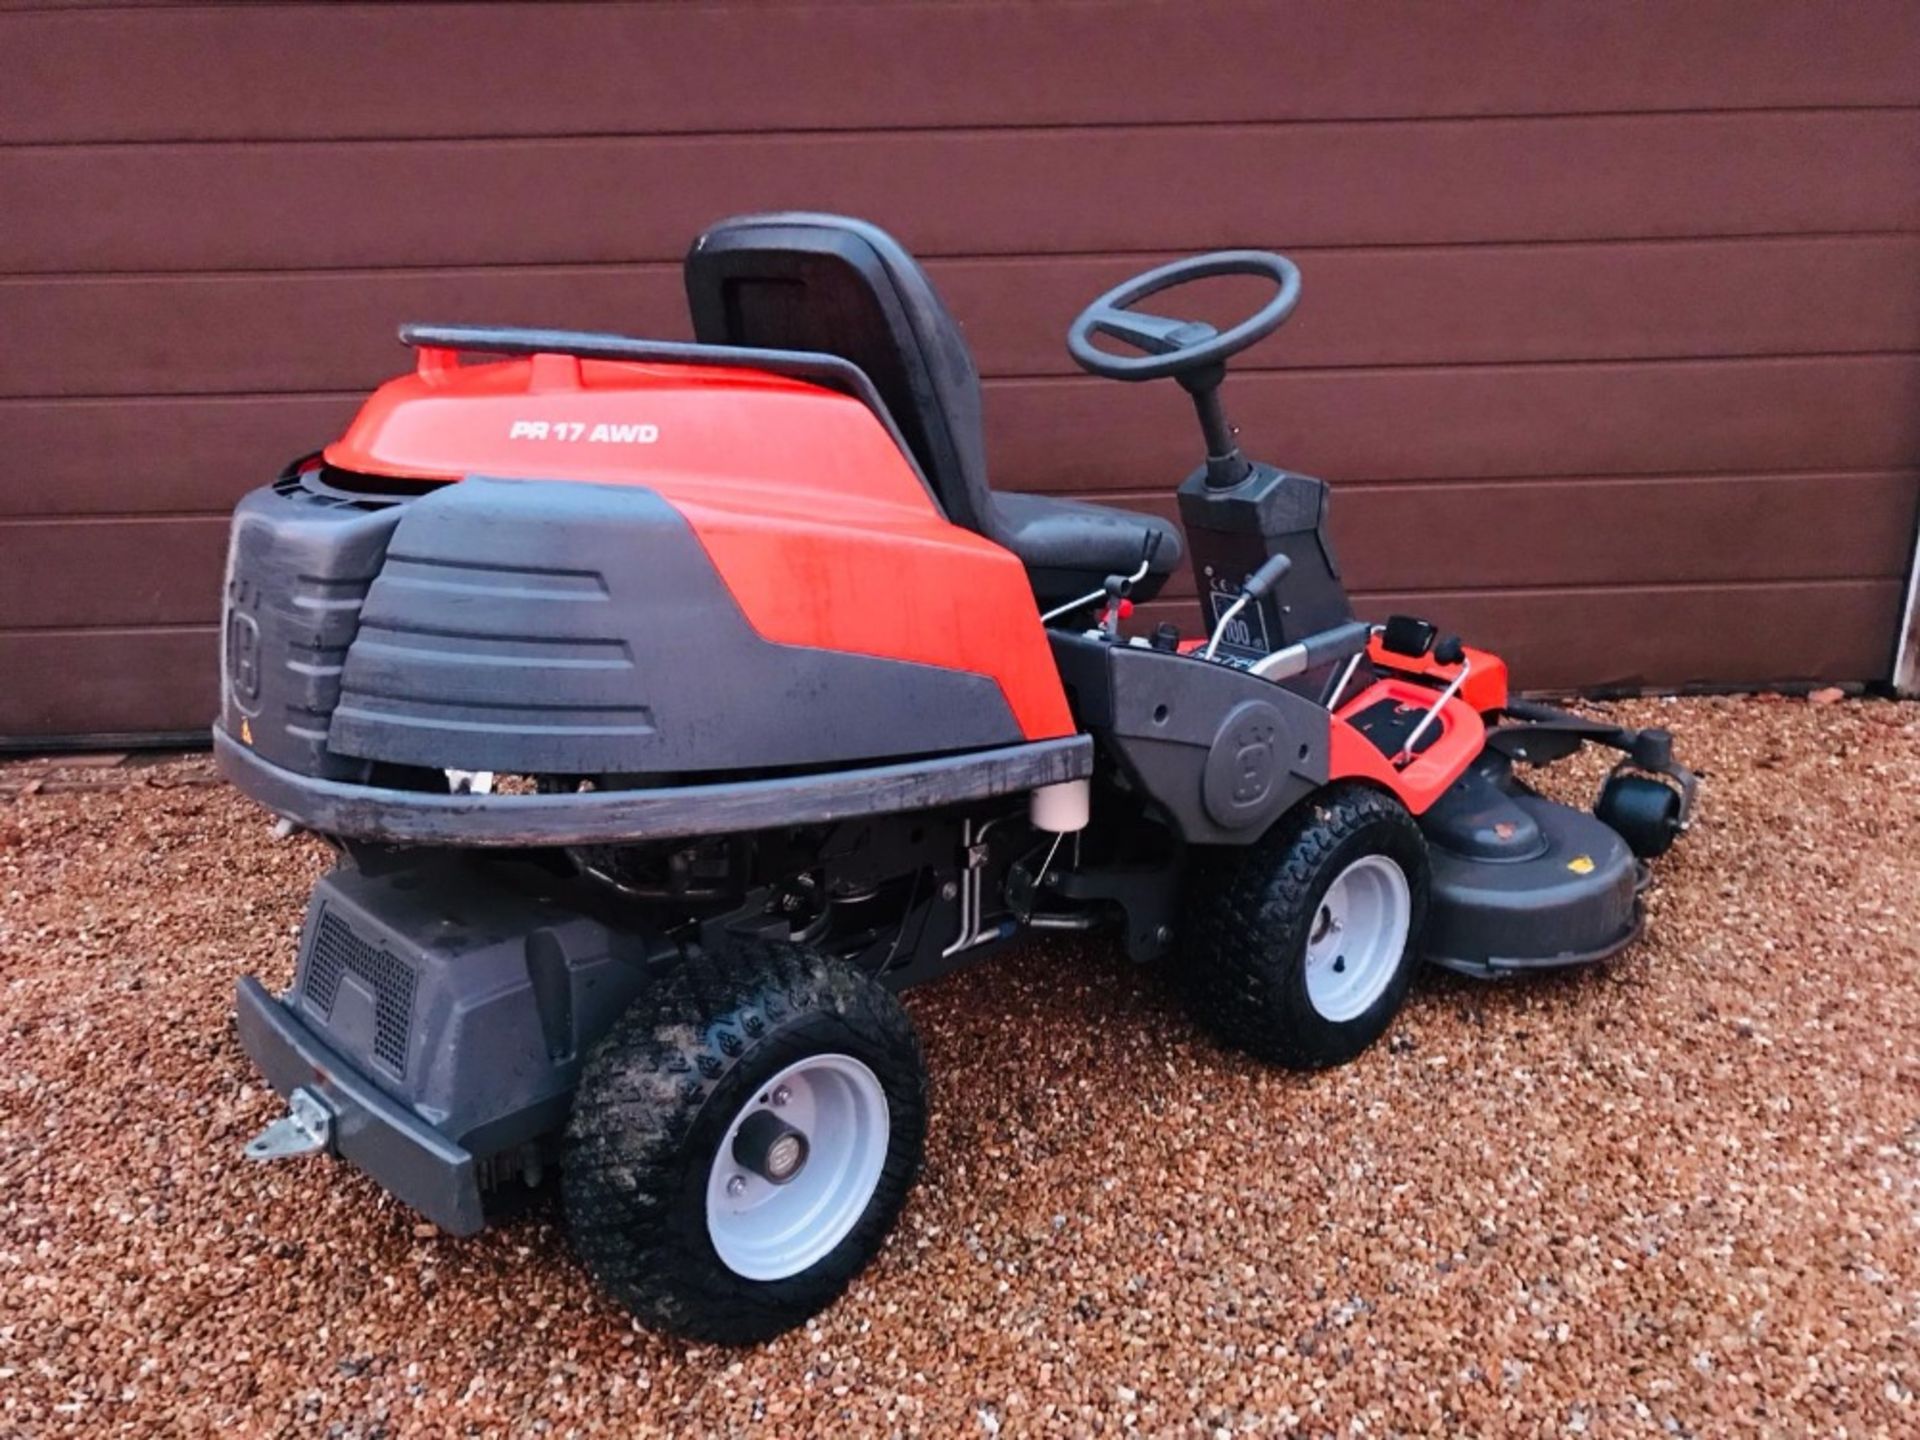 HUSQVARNA PR17 4WD RIDE ON MOWER WITH OUTFRONT MULCH DECK 112CM WIDTH. 270 REC HOURS, YEAR 2011. - Image 5 of 6